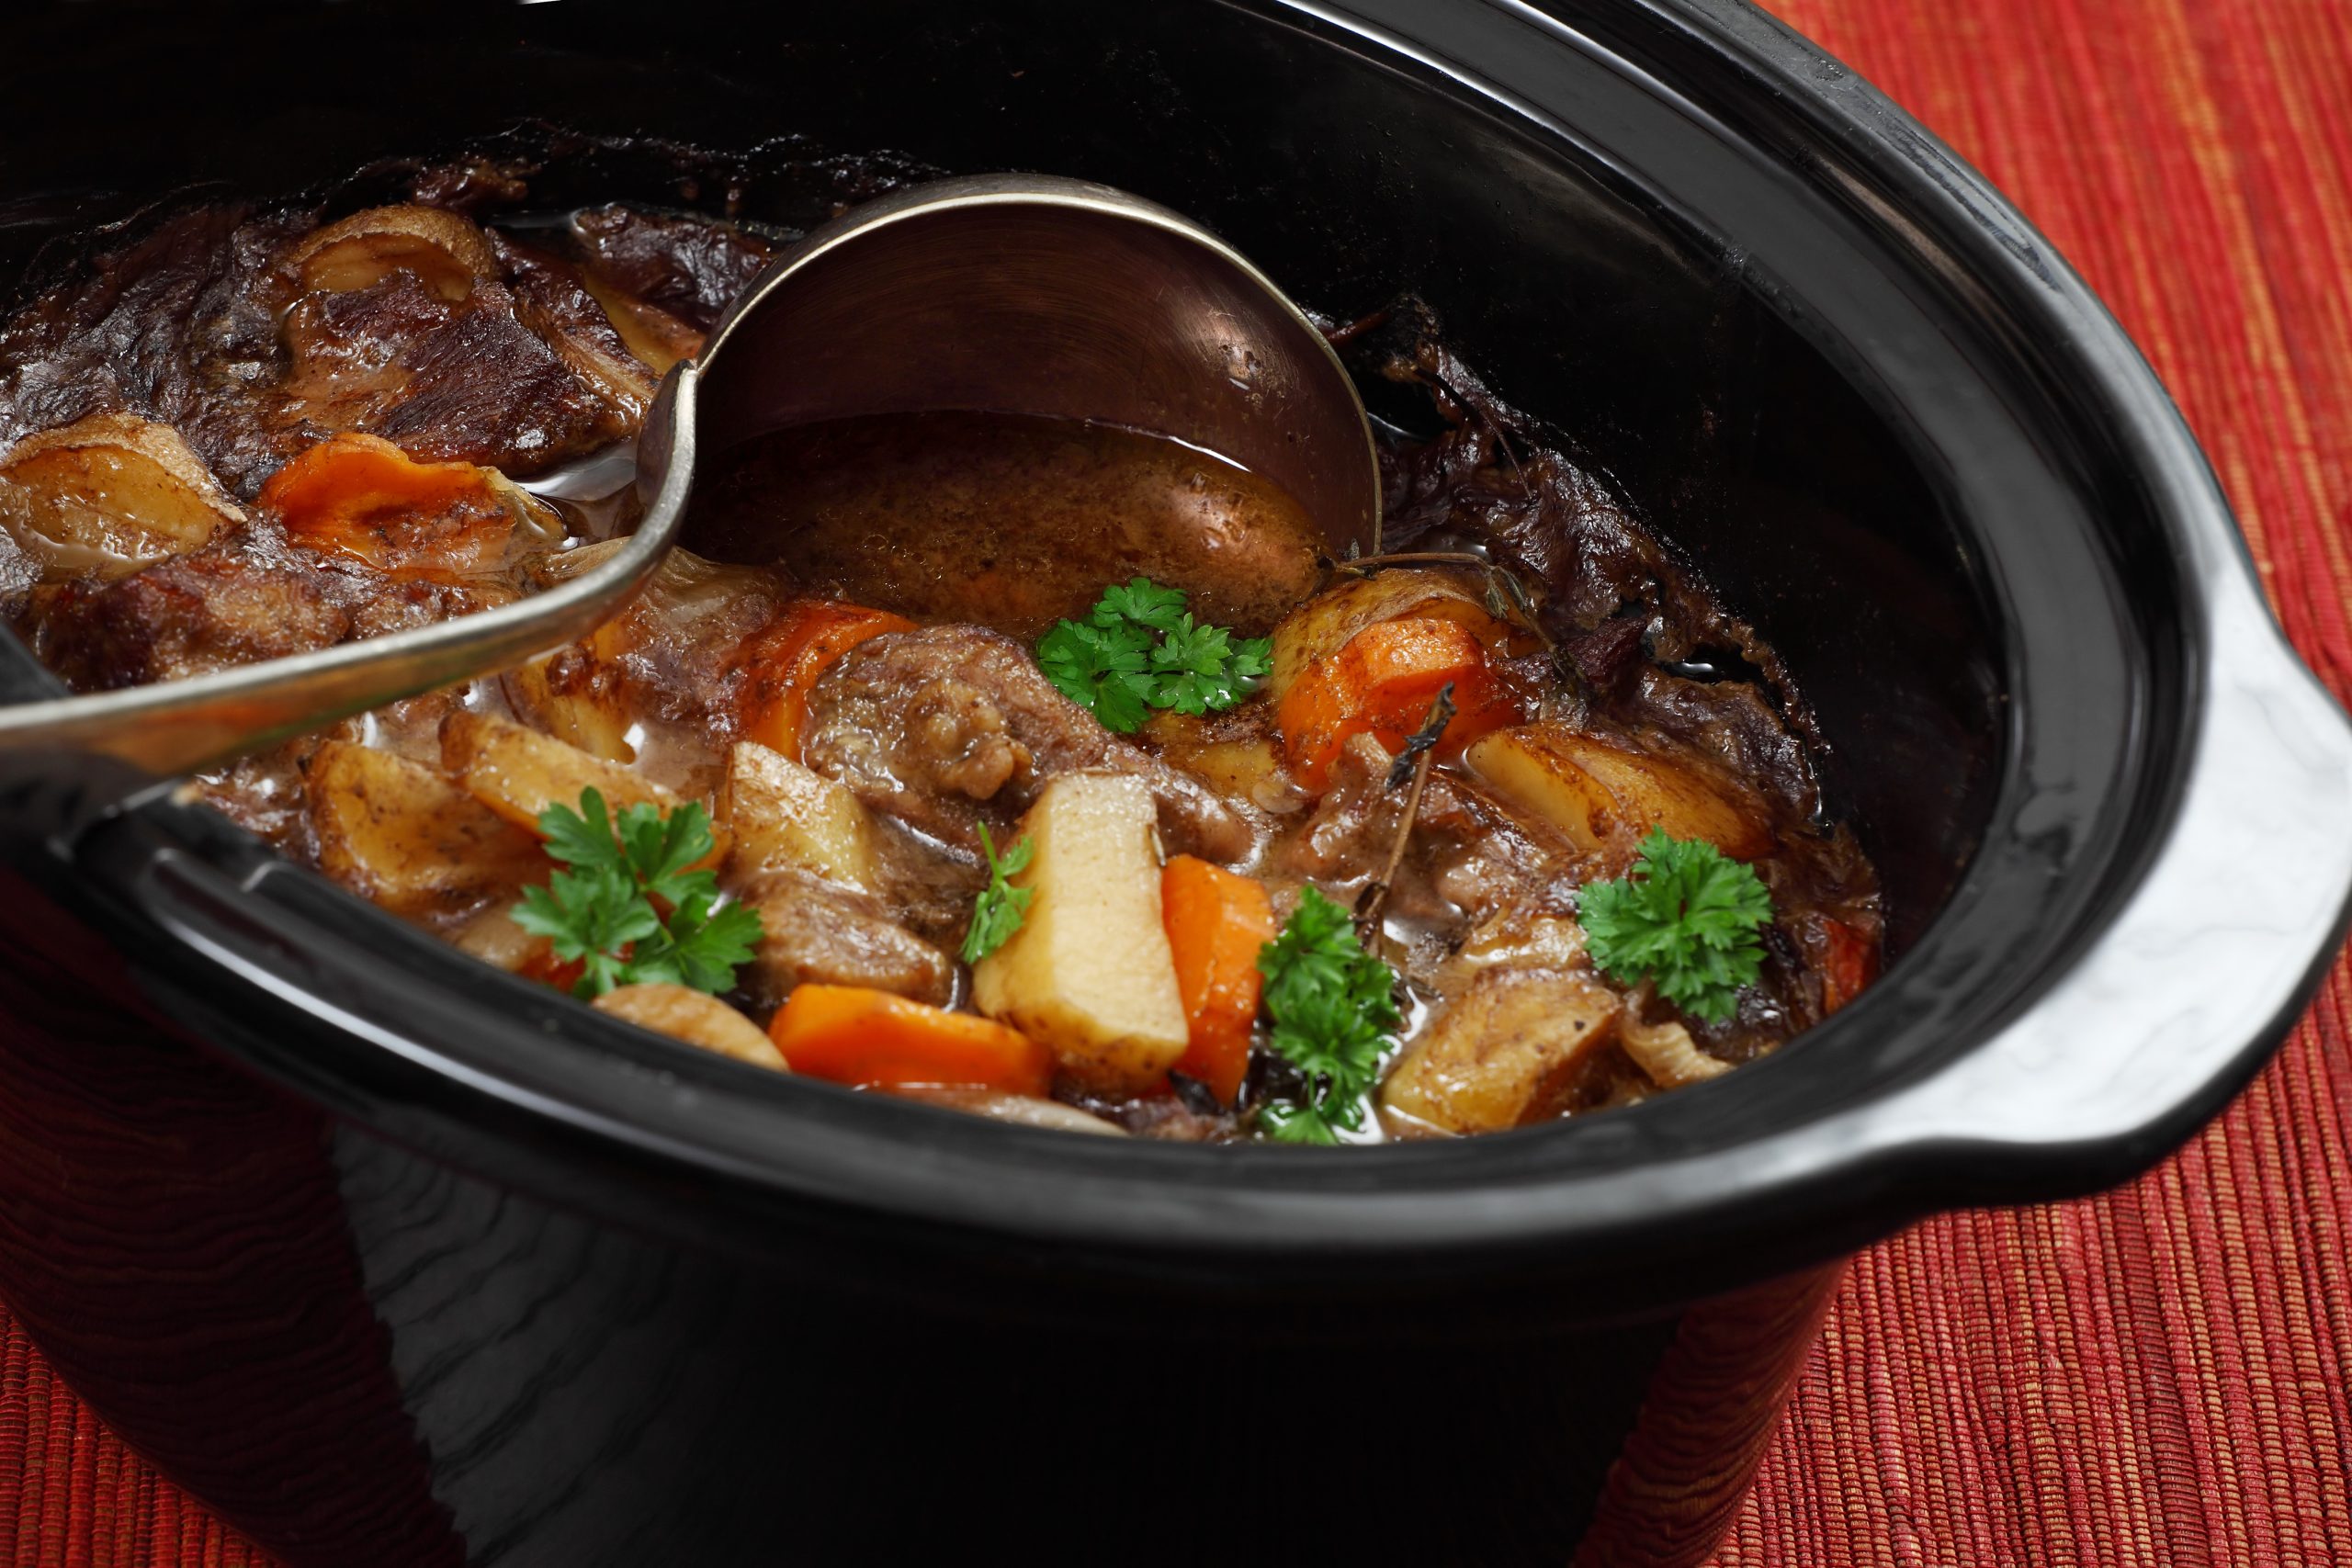 5 Reasons to Slow Down and Make More Meals With Your Slow Cooker